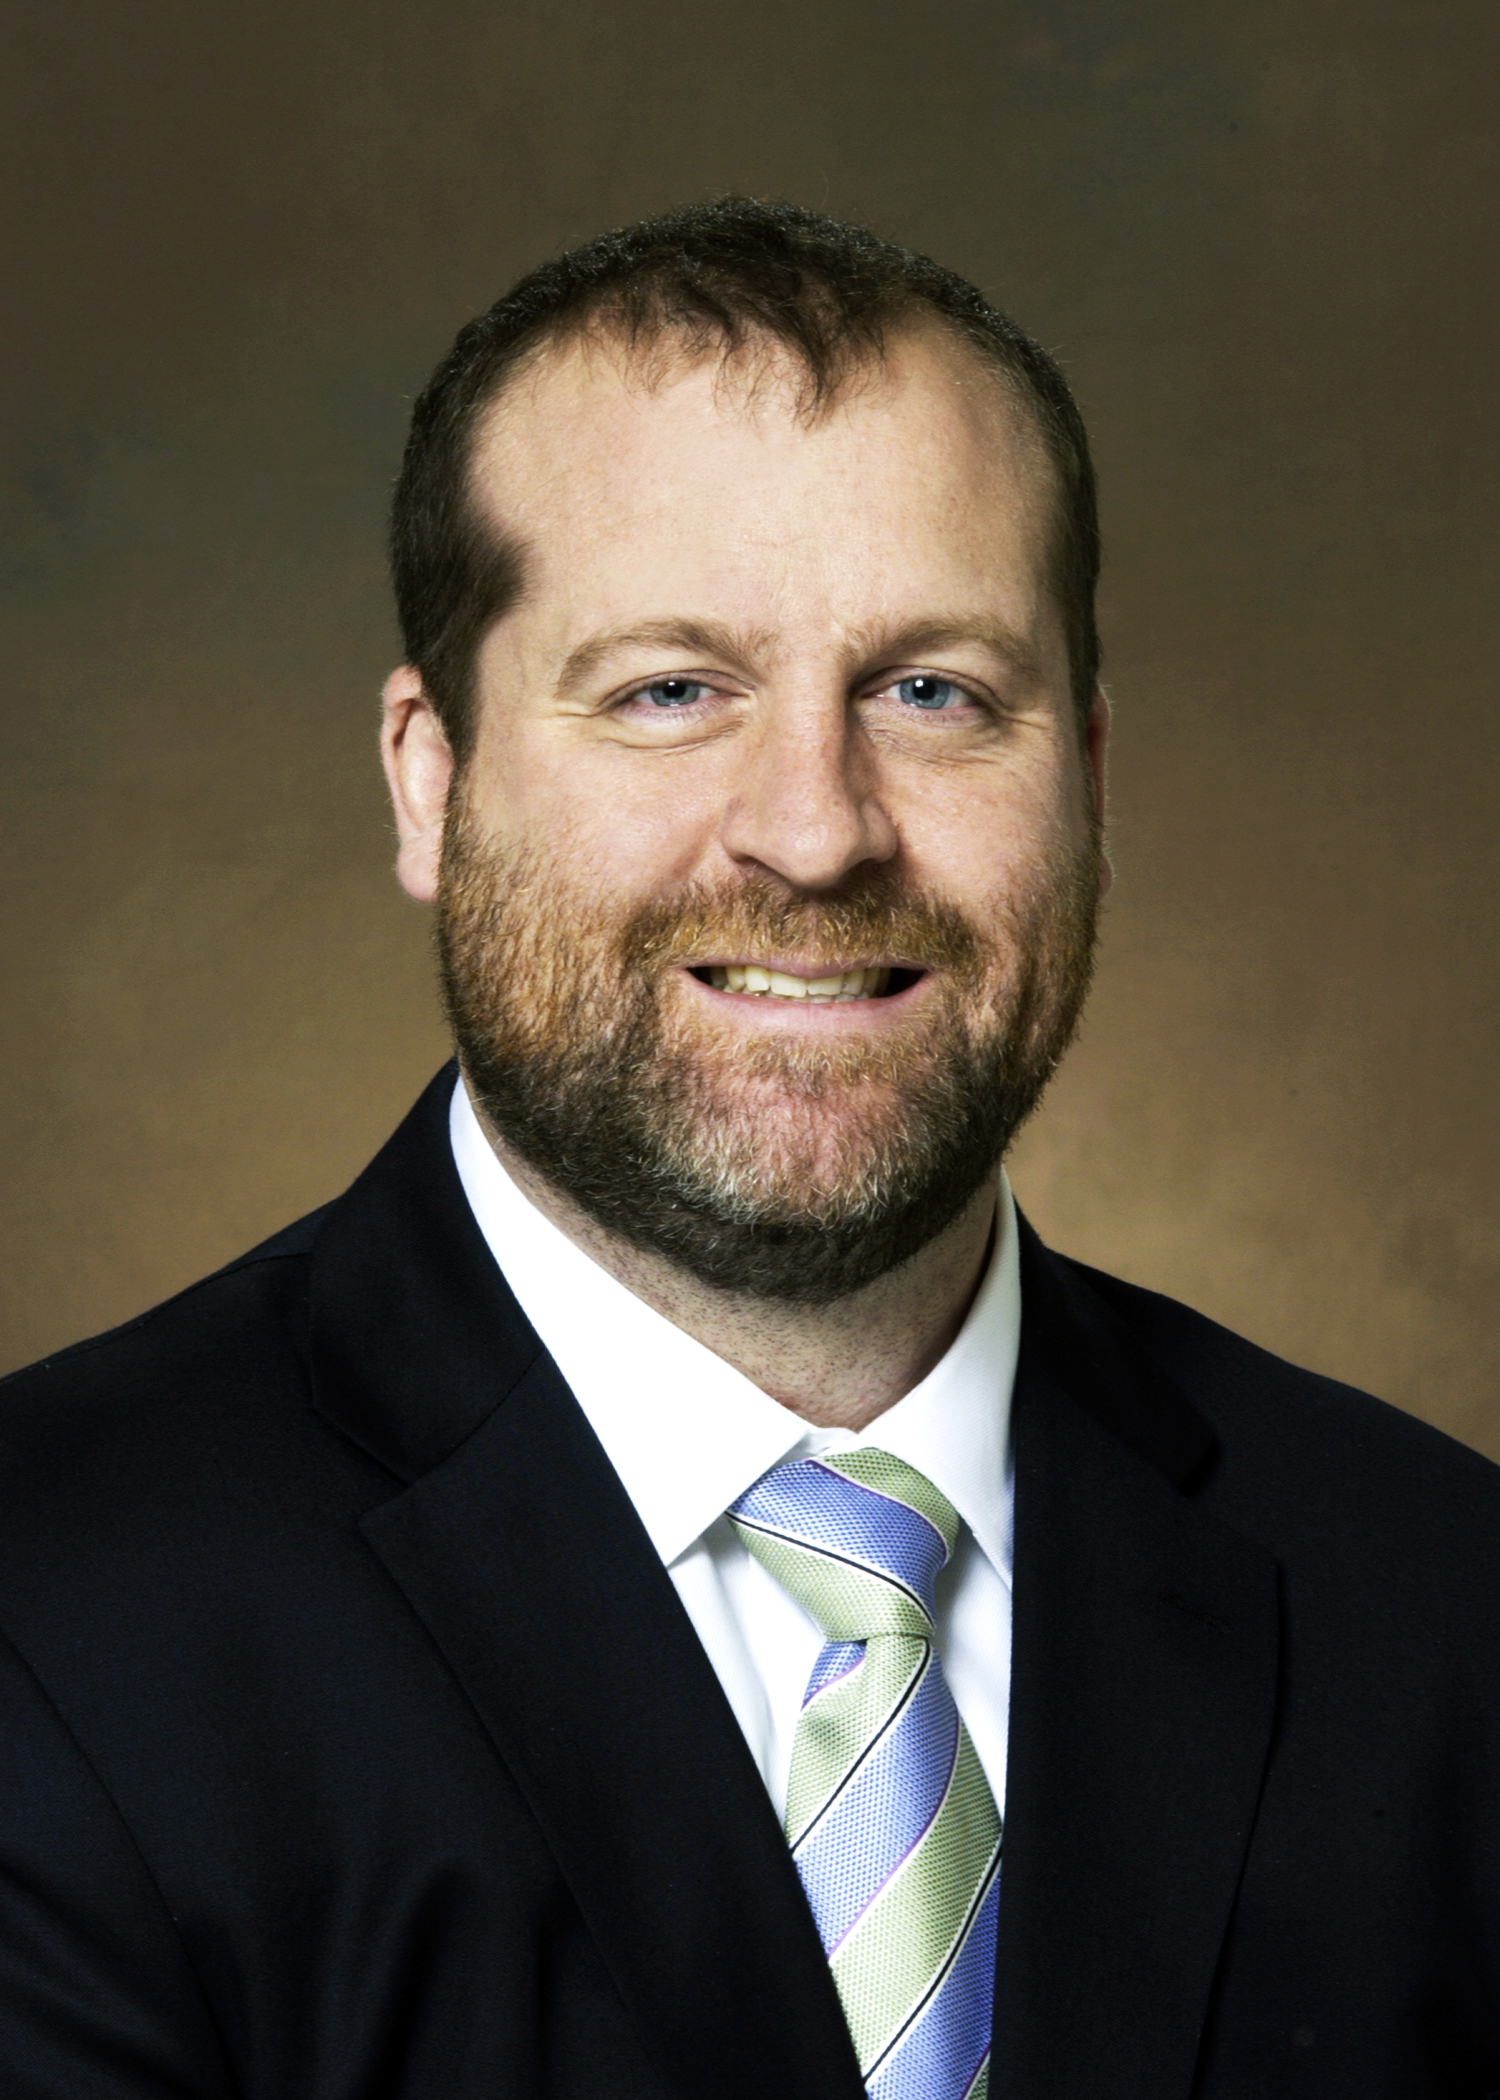 David Ripplinger - Bioproducts and Bioenergy Economist and Assistant Professor, NDSU Agribusiness and Applied Economics Department